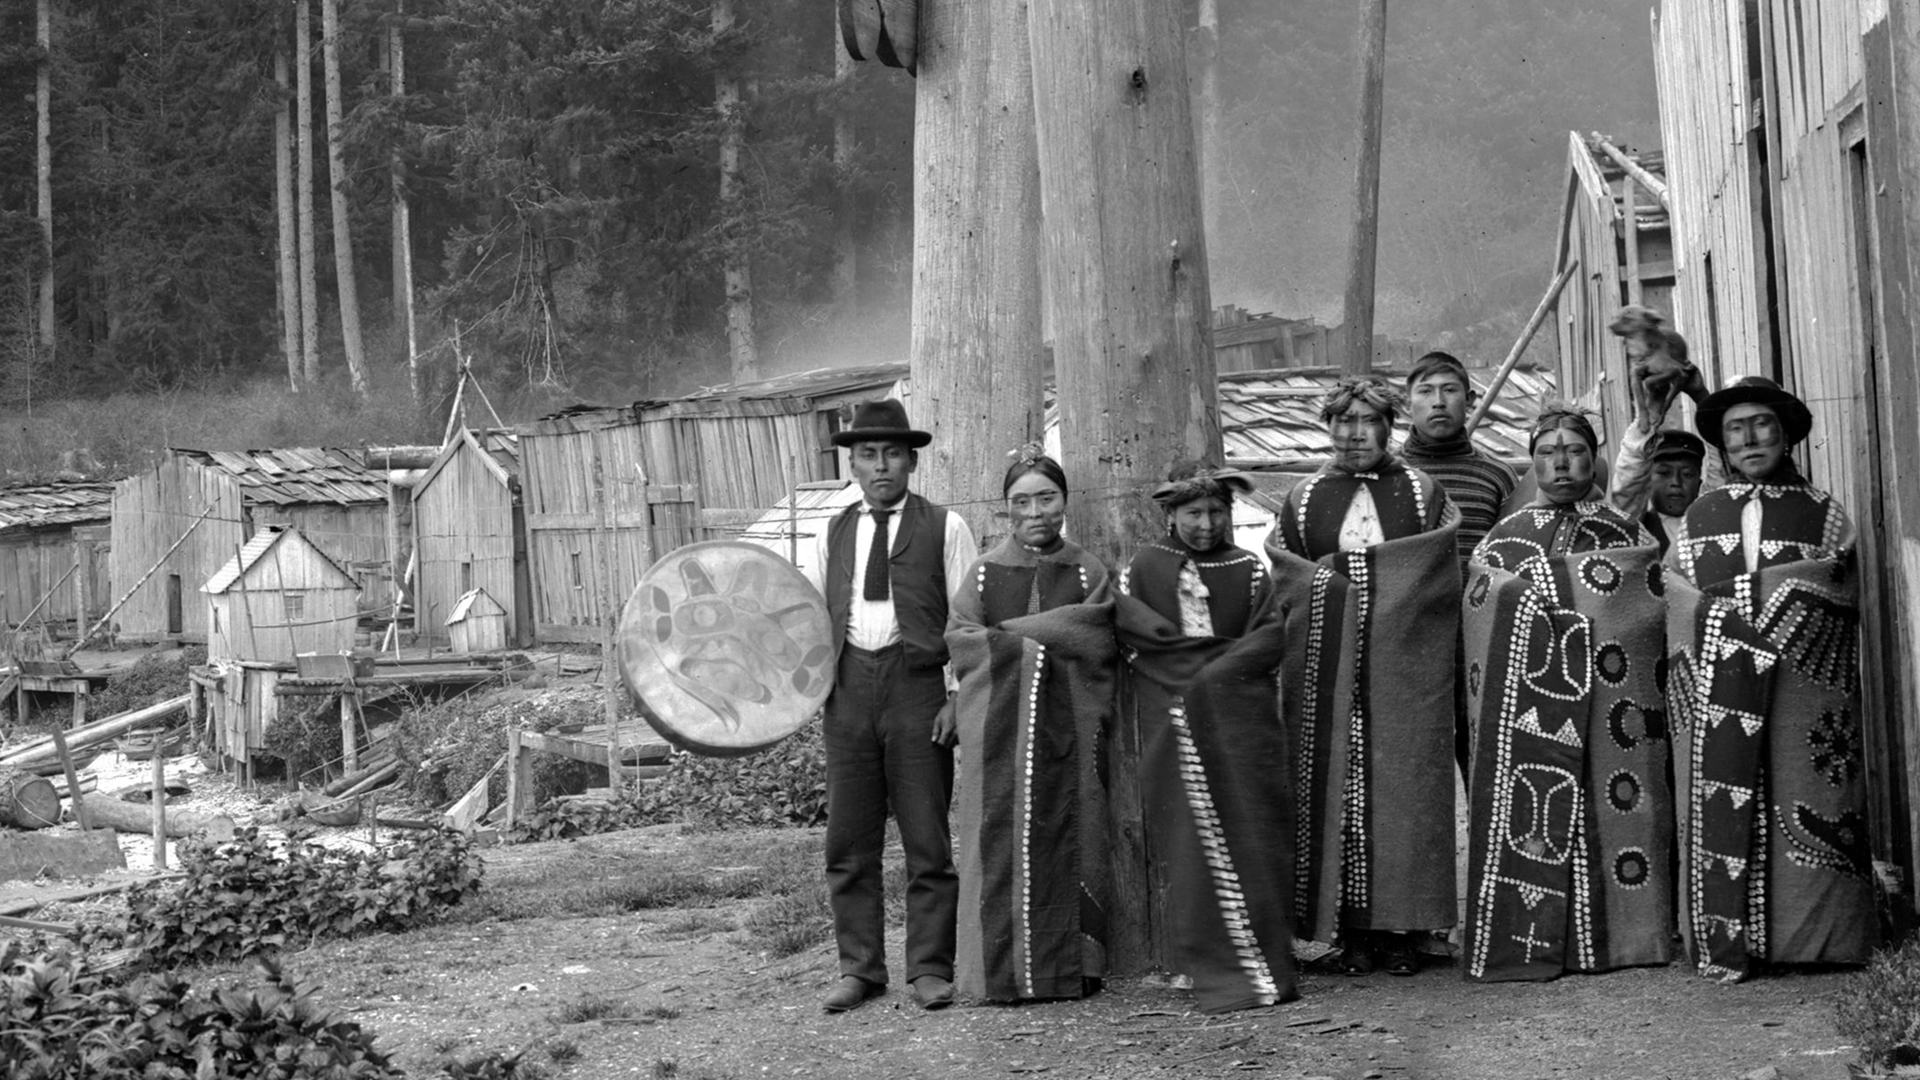 Eight members of the Kwakiutl First Nations are photographed outdoors in traditional dress and face paint, circa. 1895 – 1898. The man on the leftmost side holds a large drum.